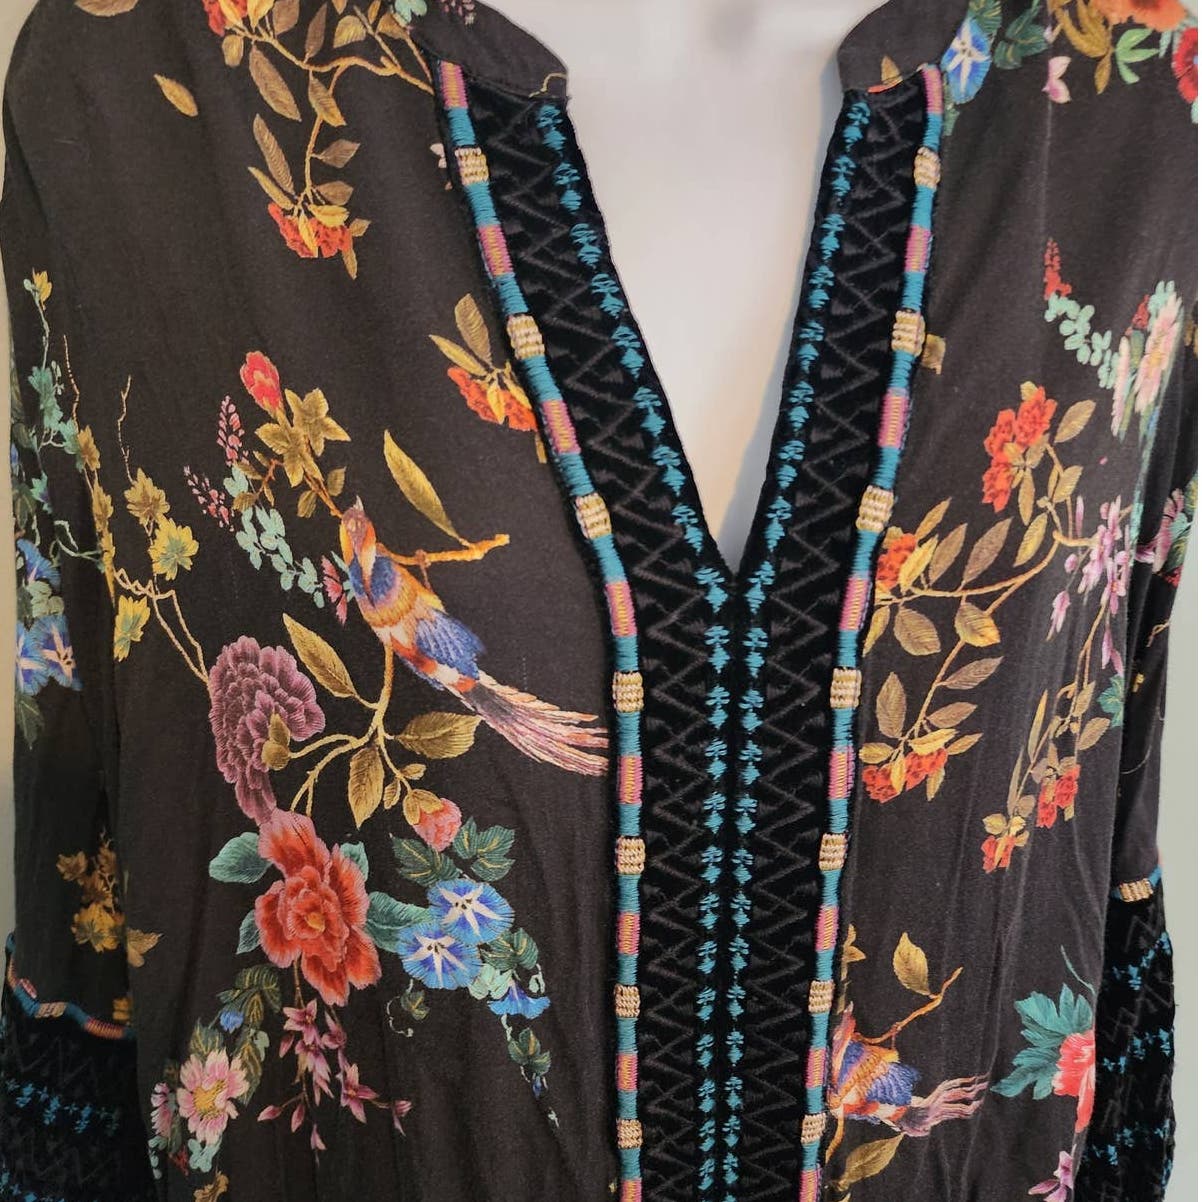 Johnny Was Black Floral Blouse with Velvet Trim Size Small